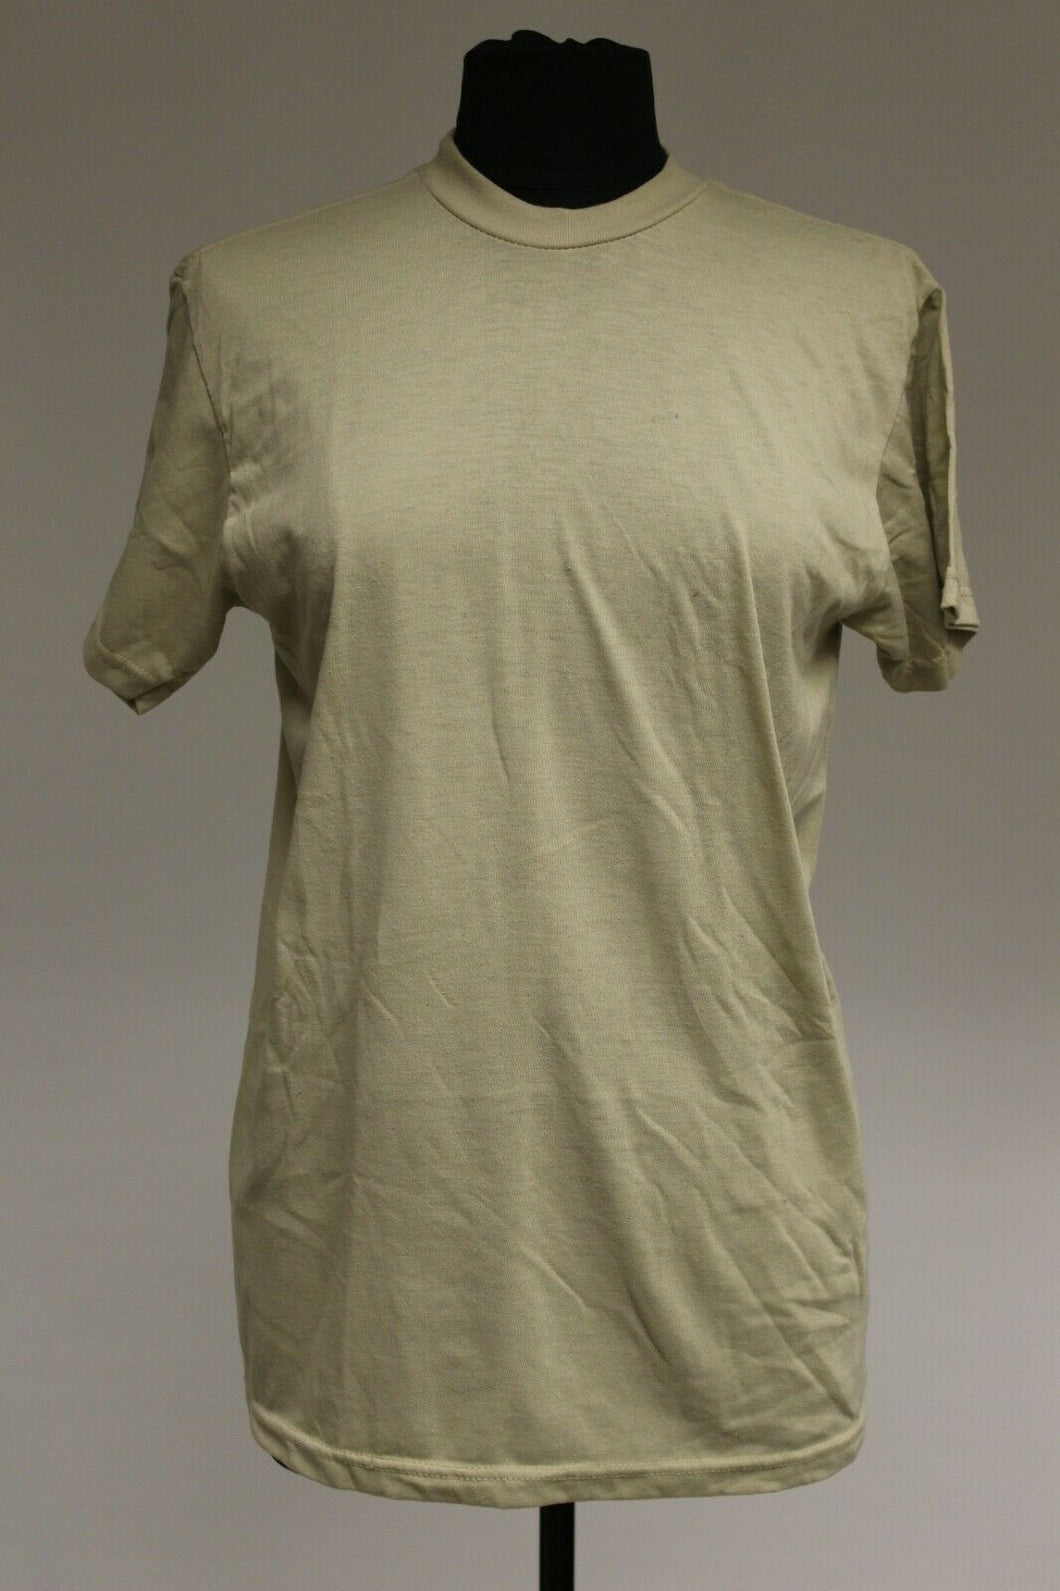 US Military Short Sleeve Desert Sand Tan T-Shirts - 50/50 Cotton Poly - Used